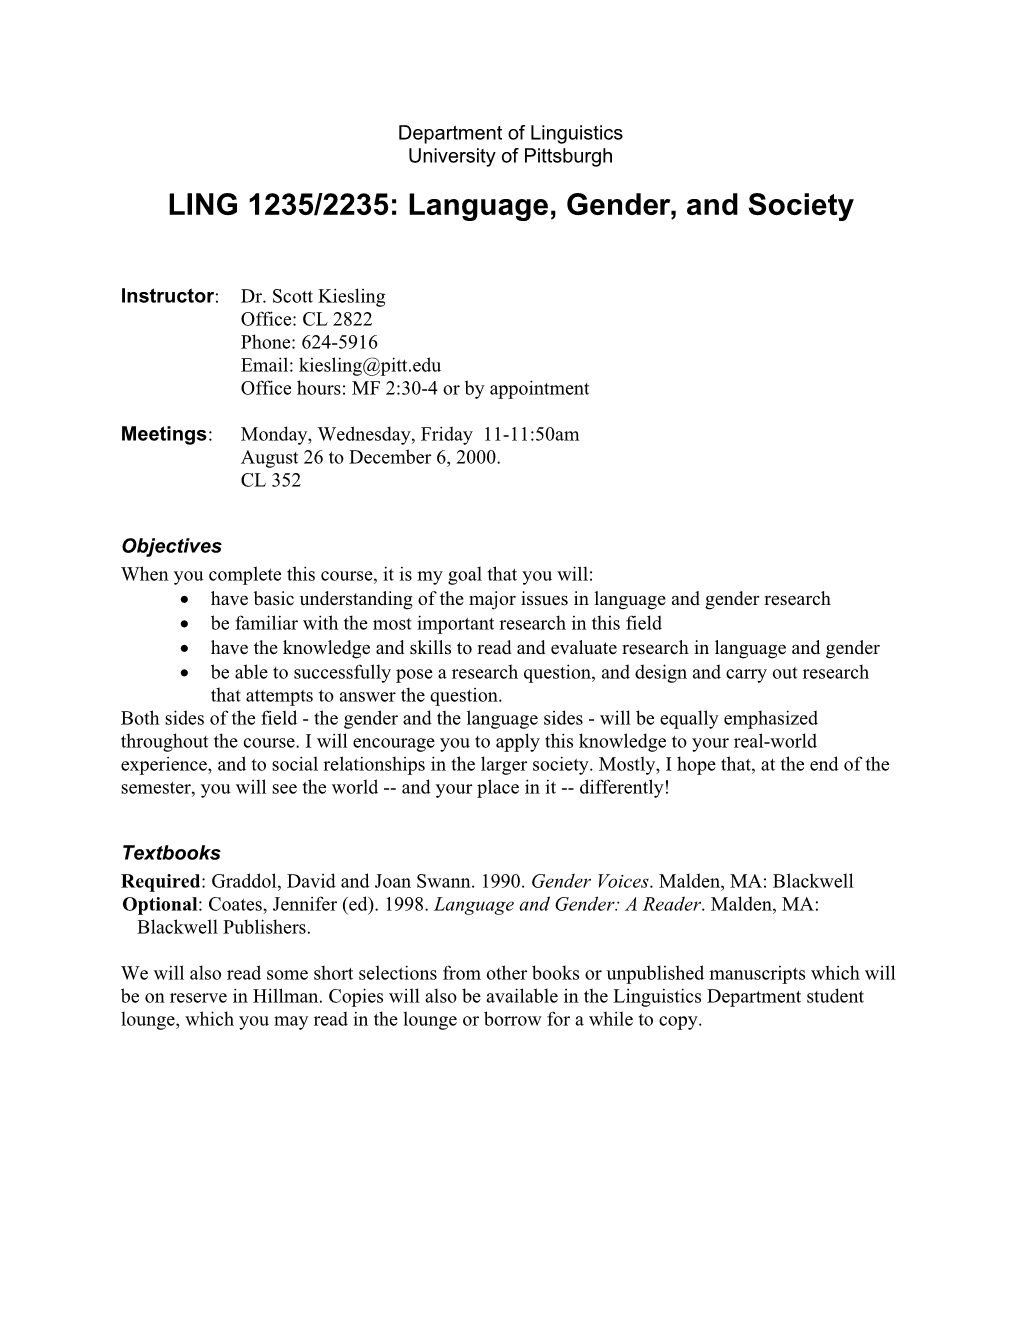 LING 1235/2235: Language, Gender, and Society